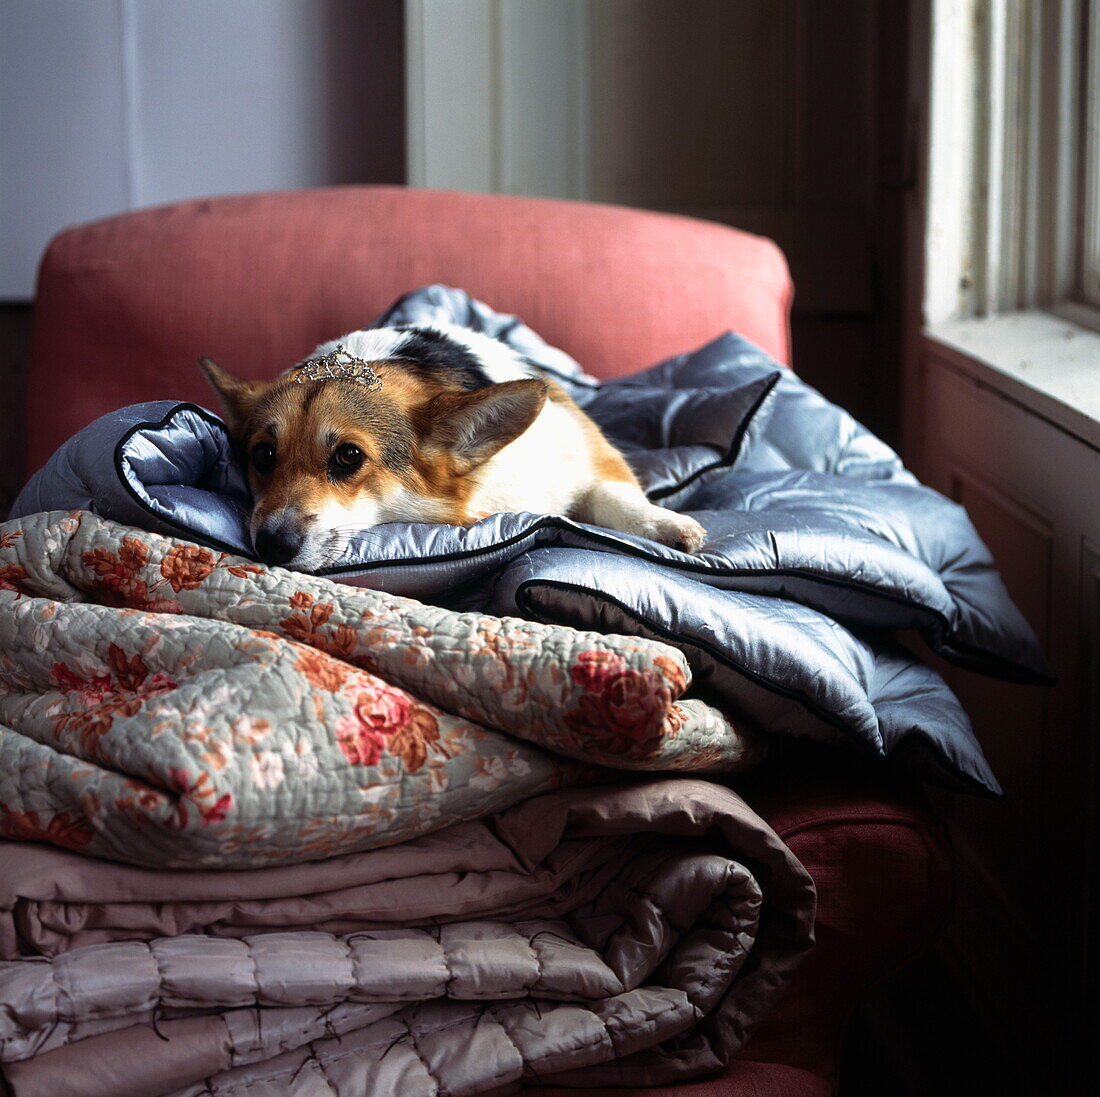 Dog lying on stack of quilts on armchair in London home, UK